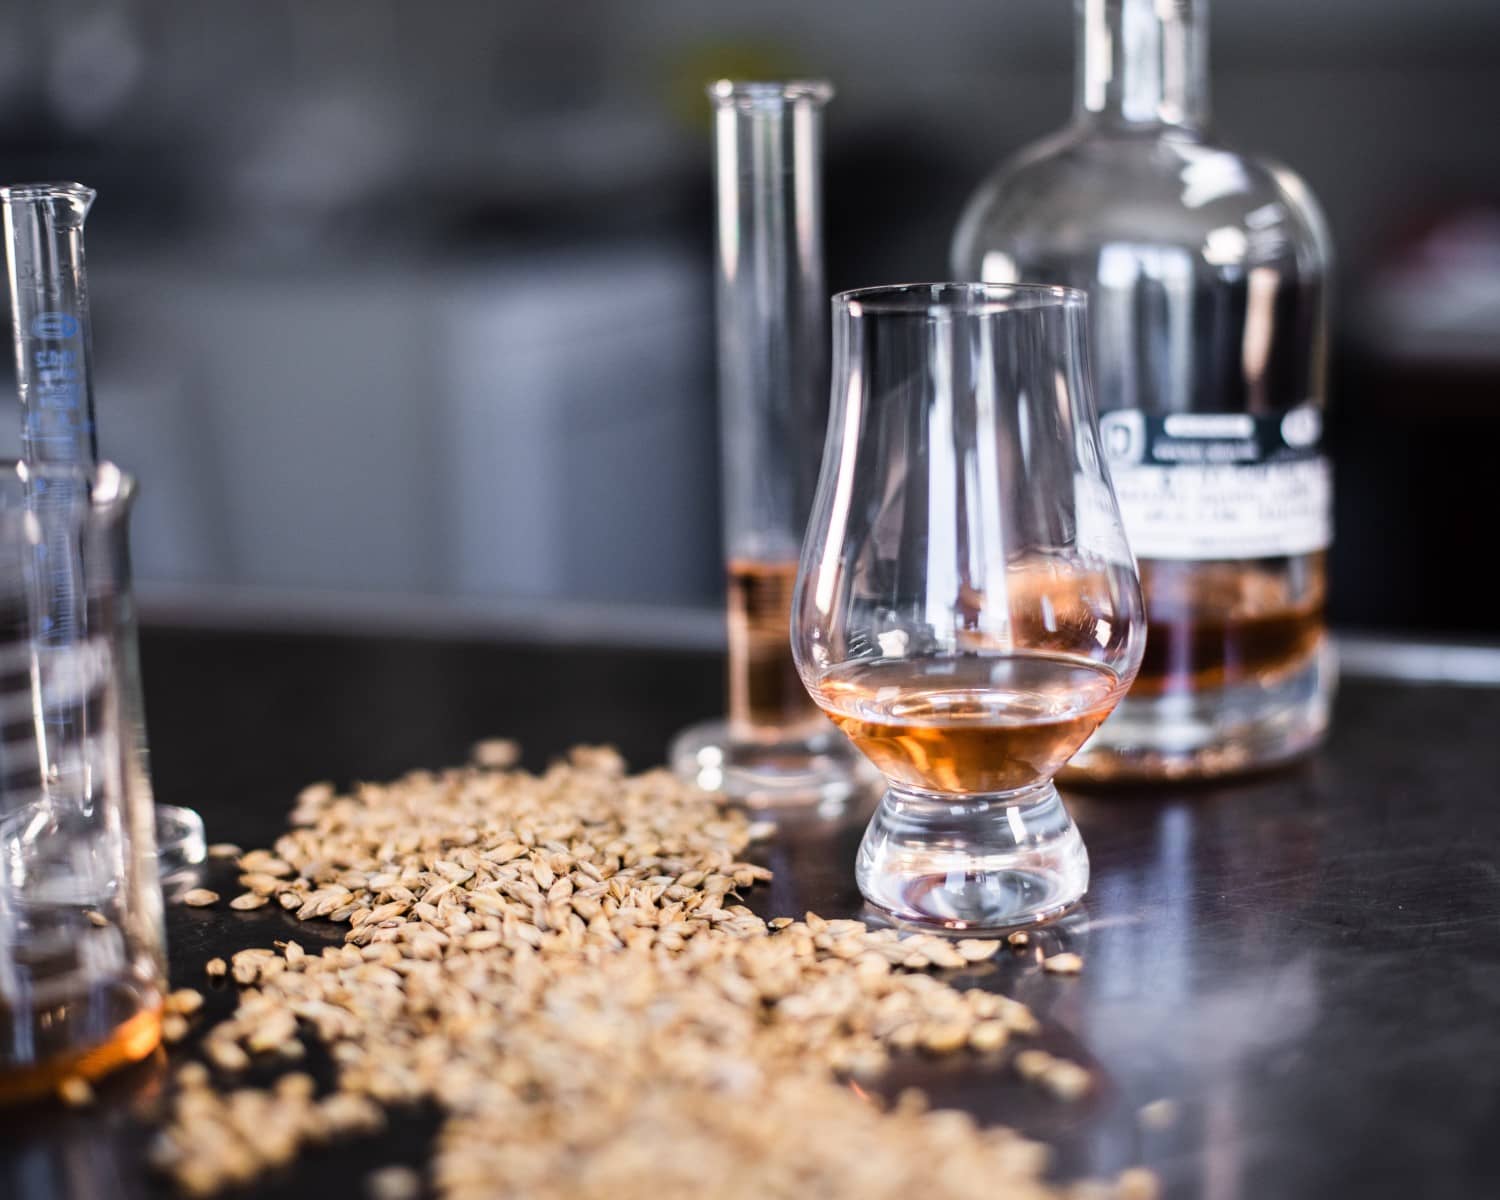 For what is single malt whisky, it must be made with malted barley